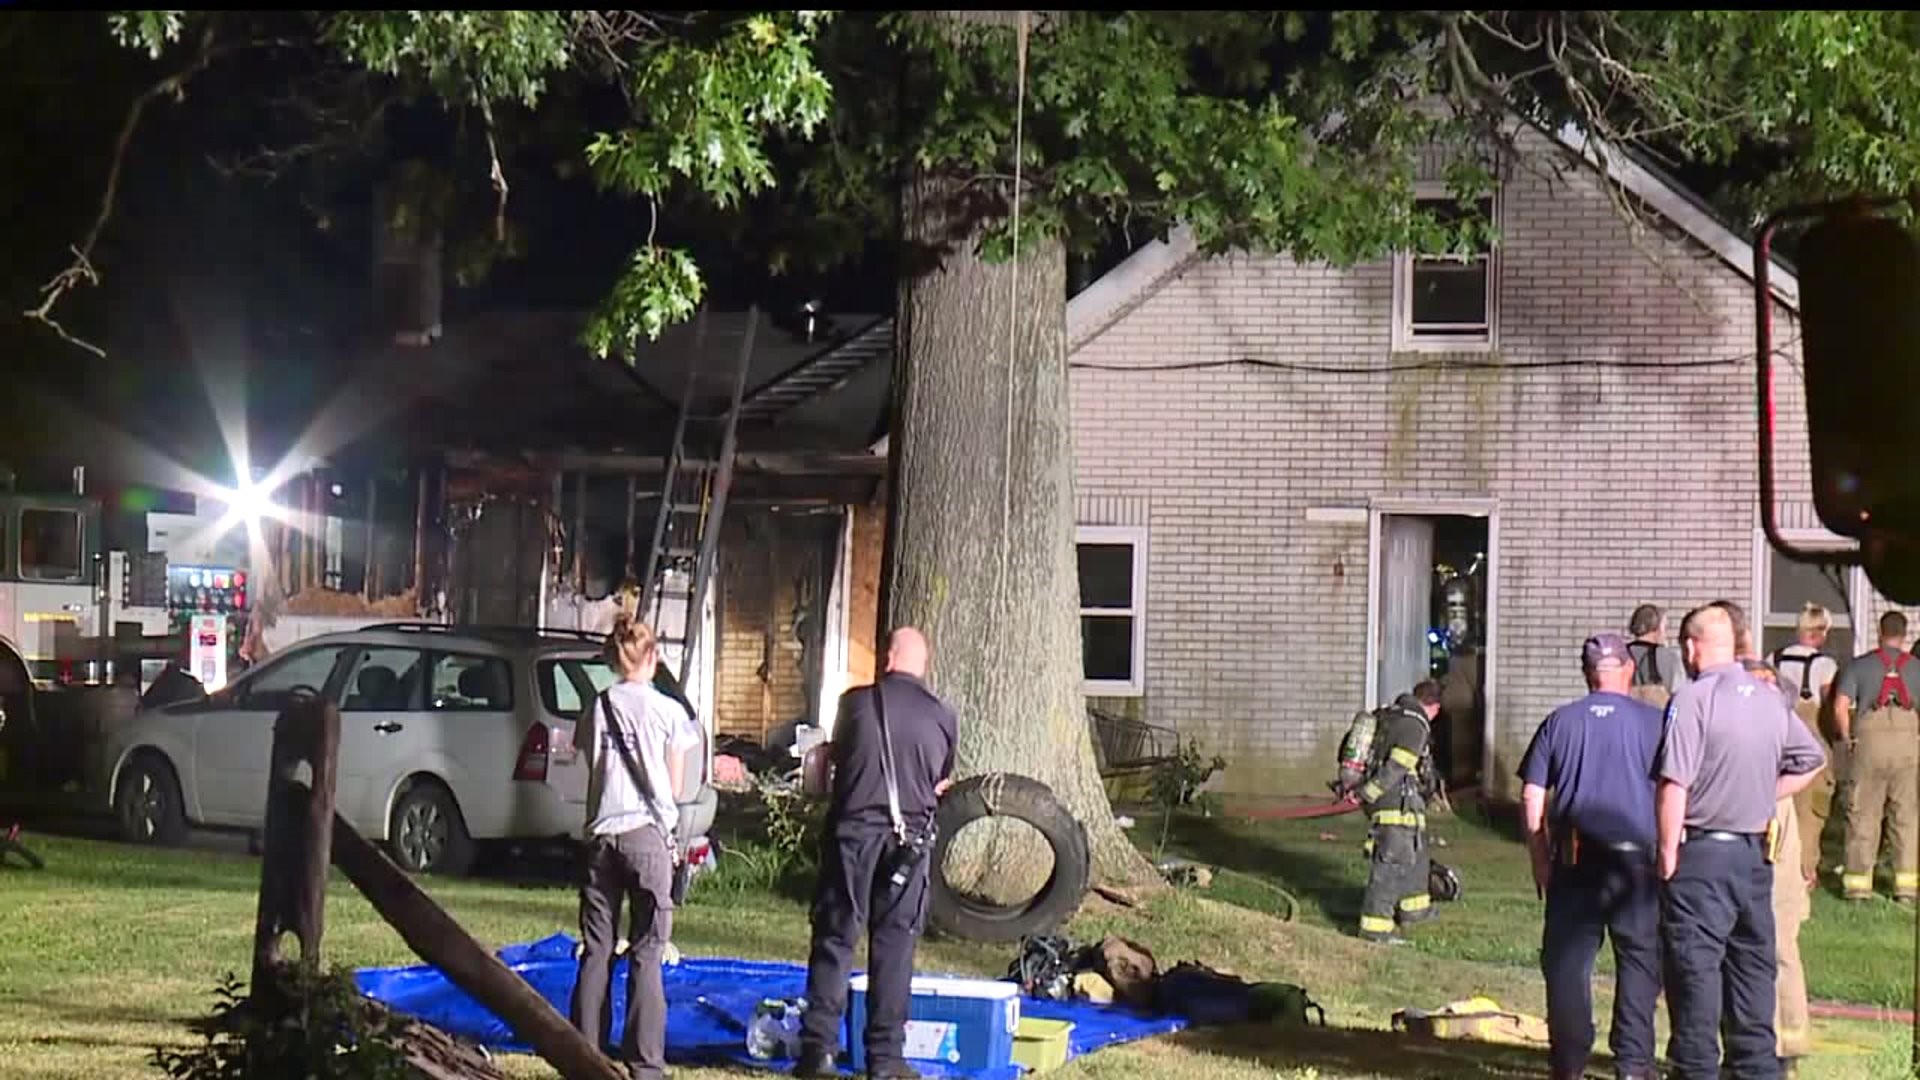 Four people displaced after fire in Lower Chanceford Township